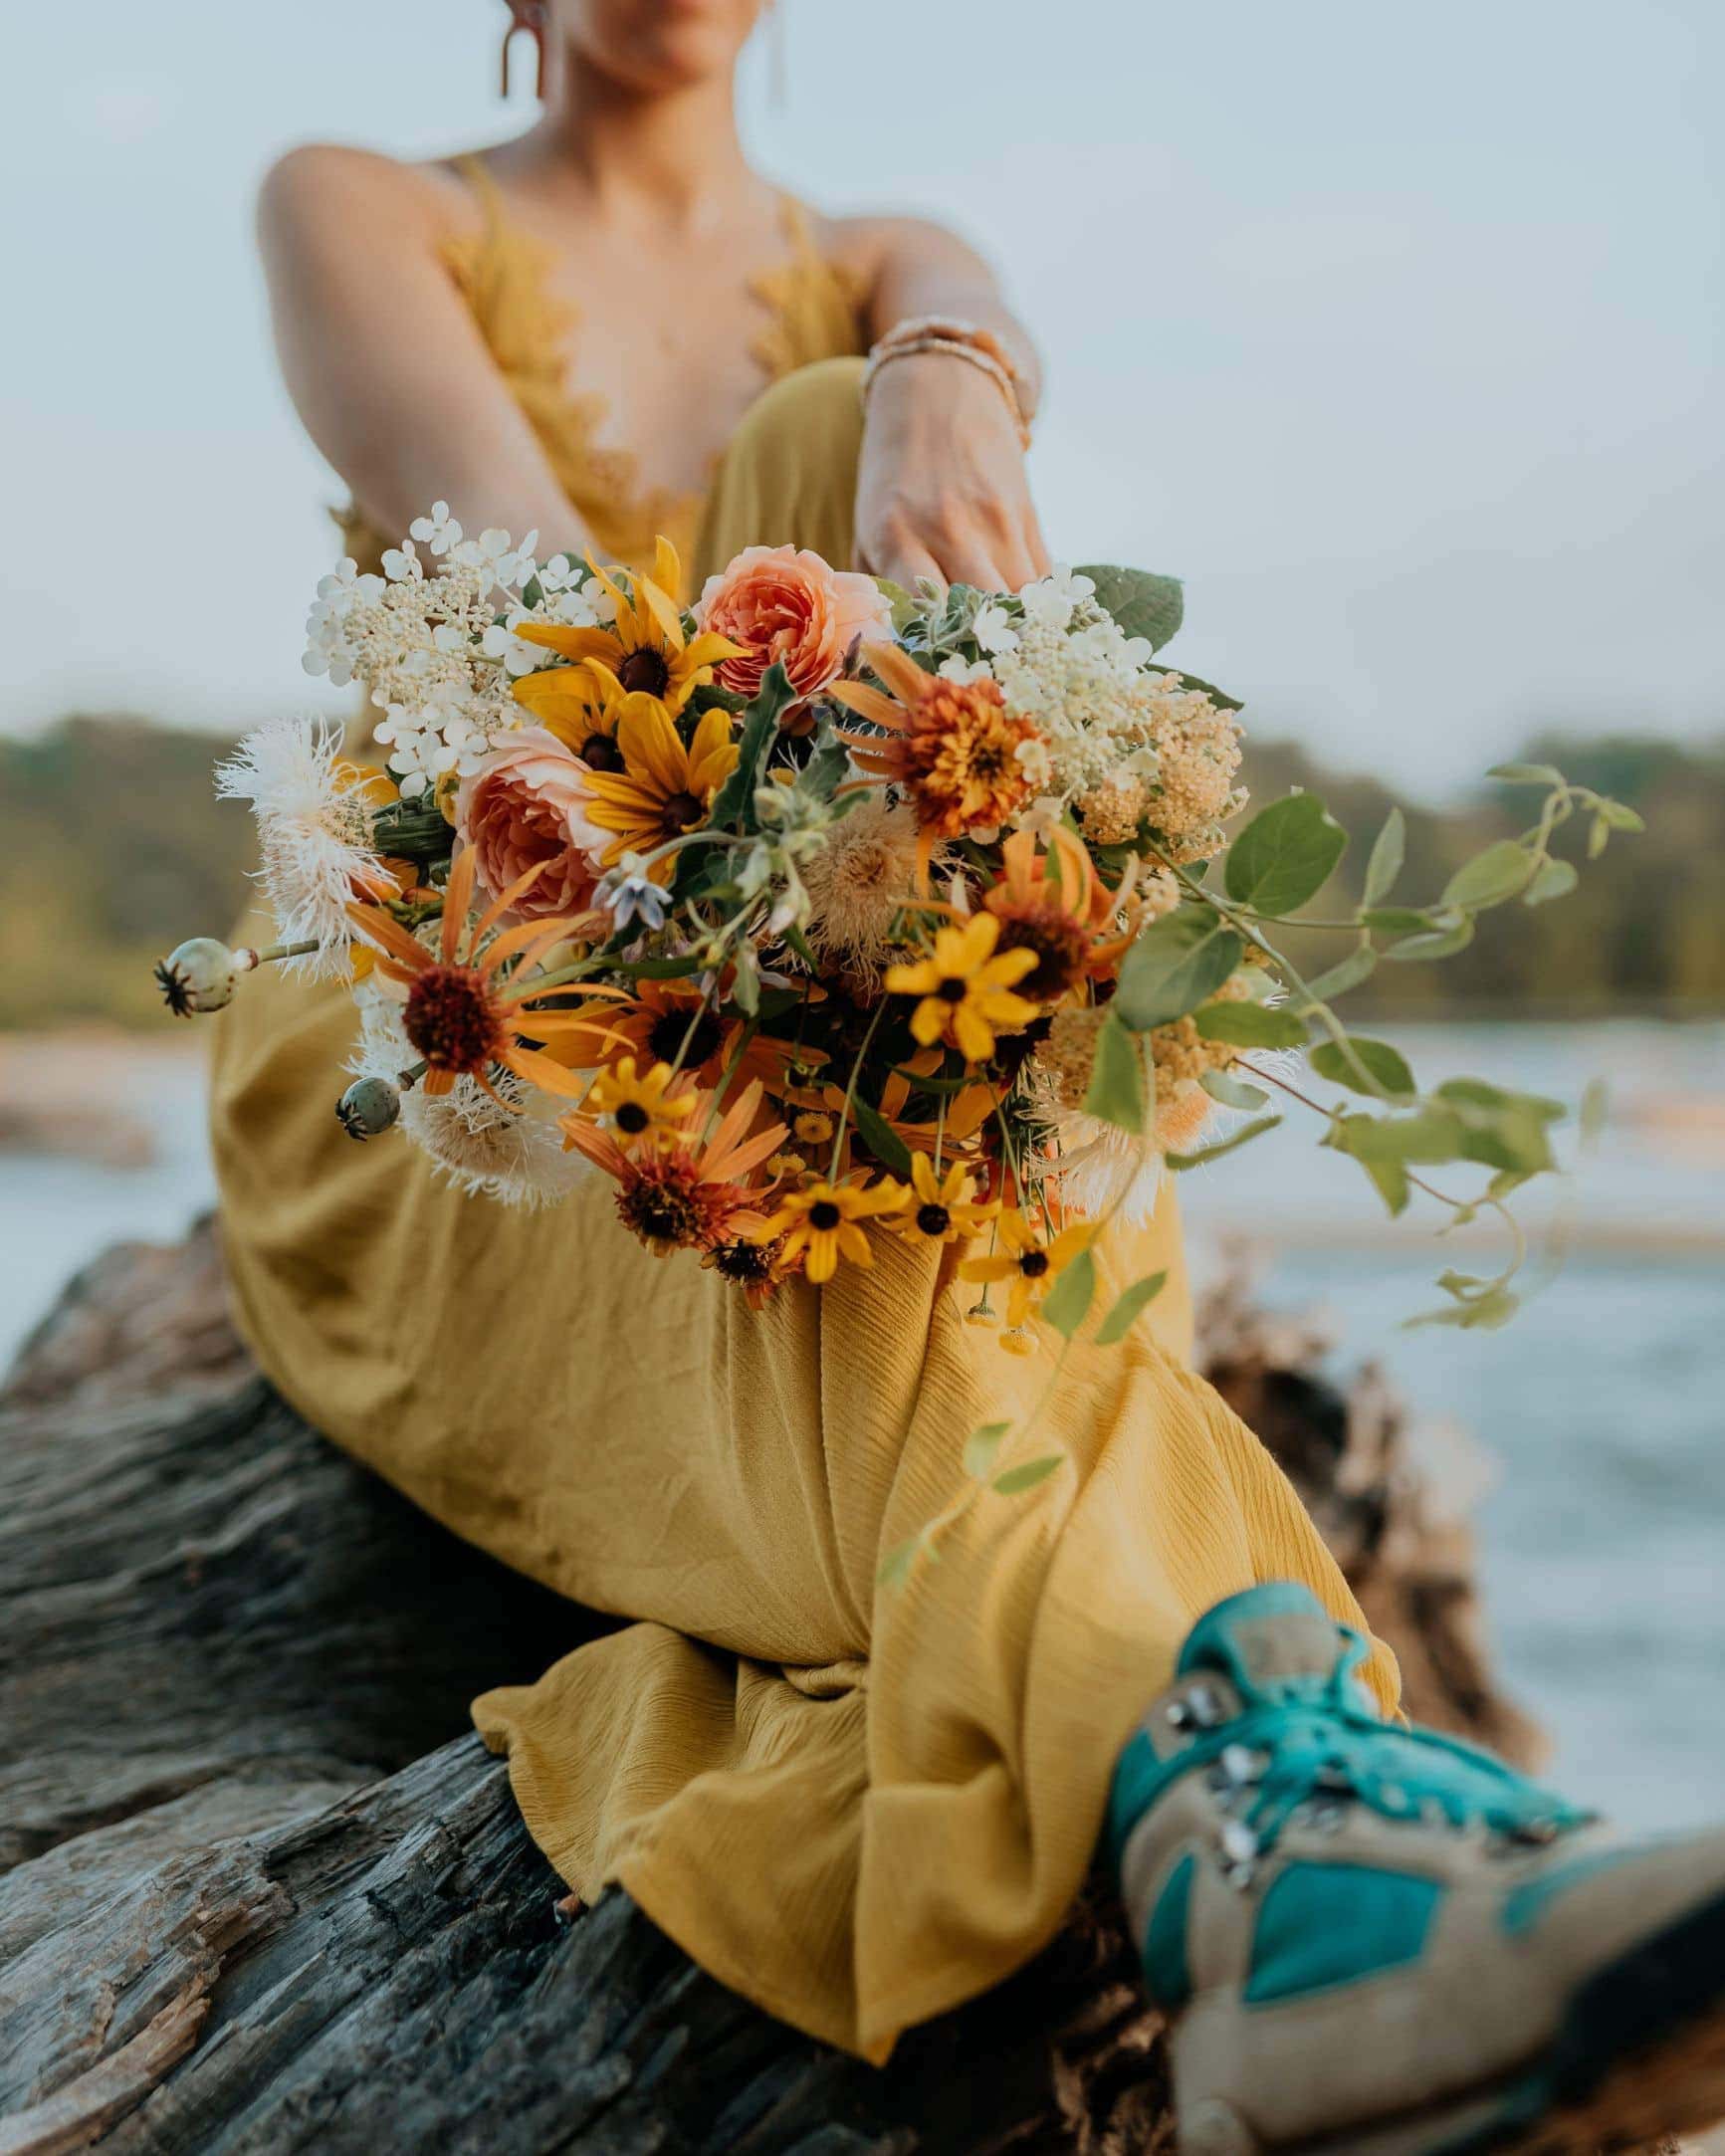 A bride in a yellow dress and vintage hiking boots shows off her bouquet.